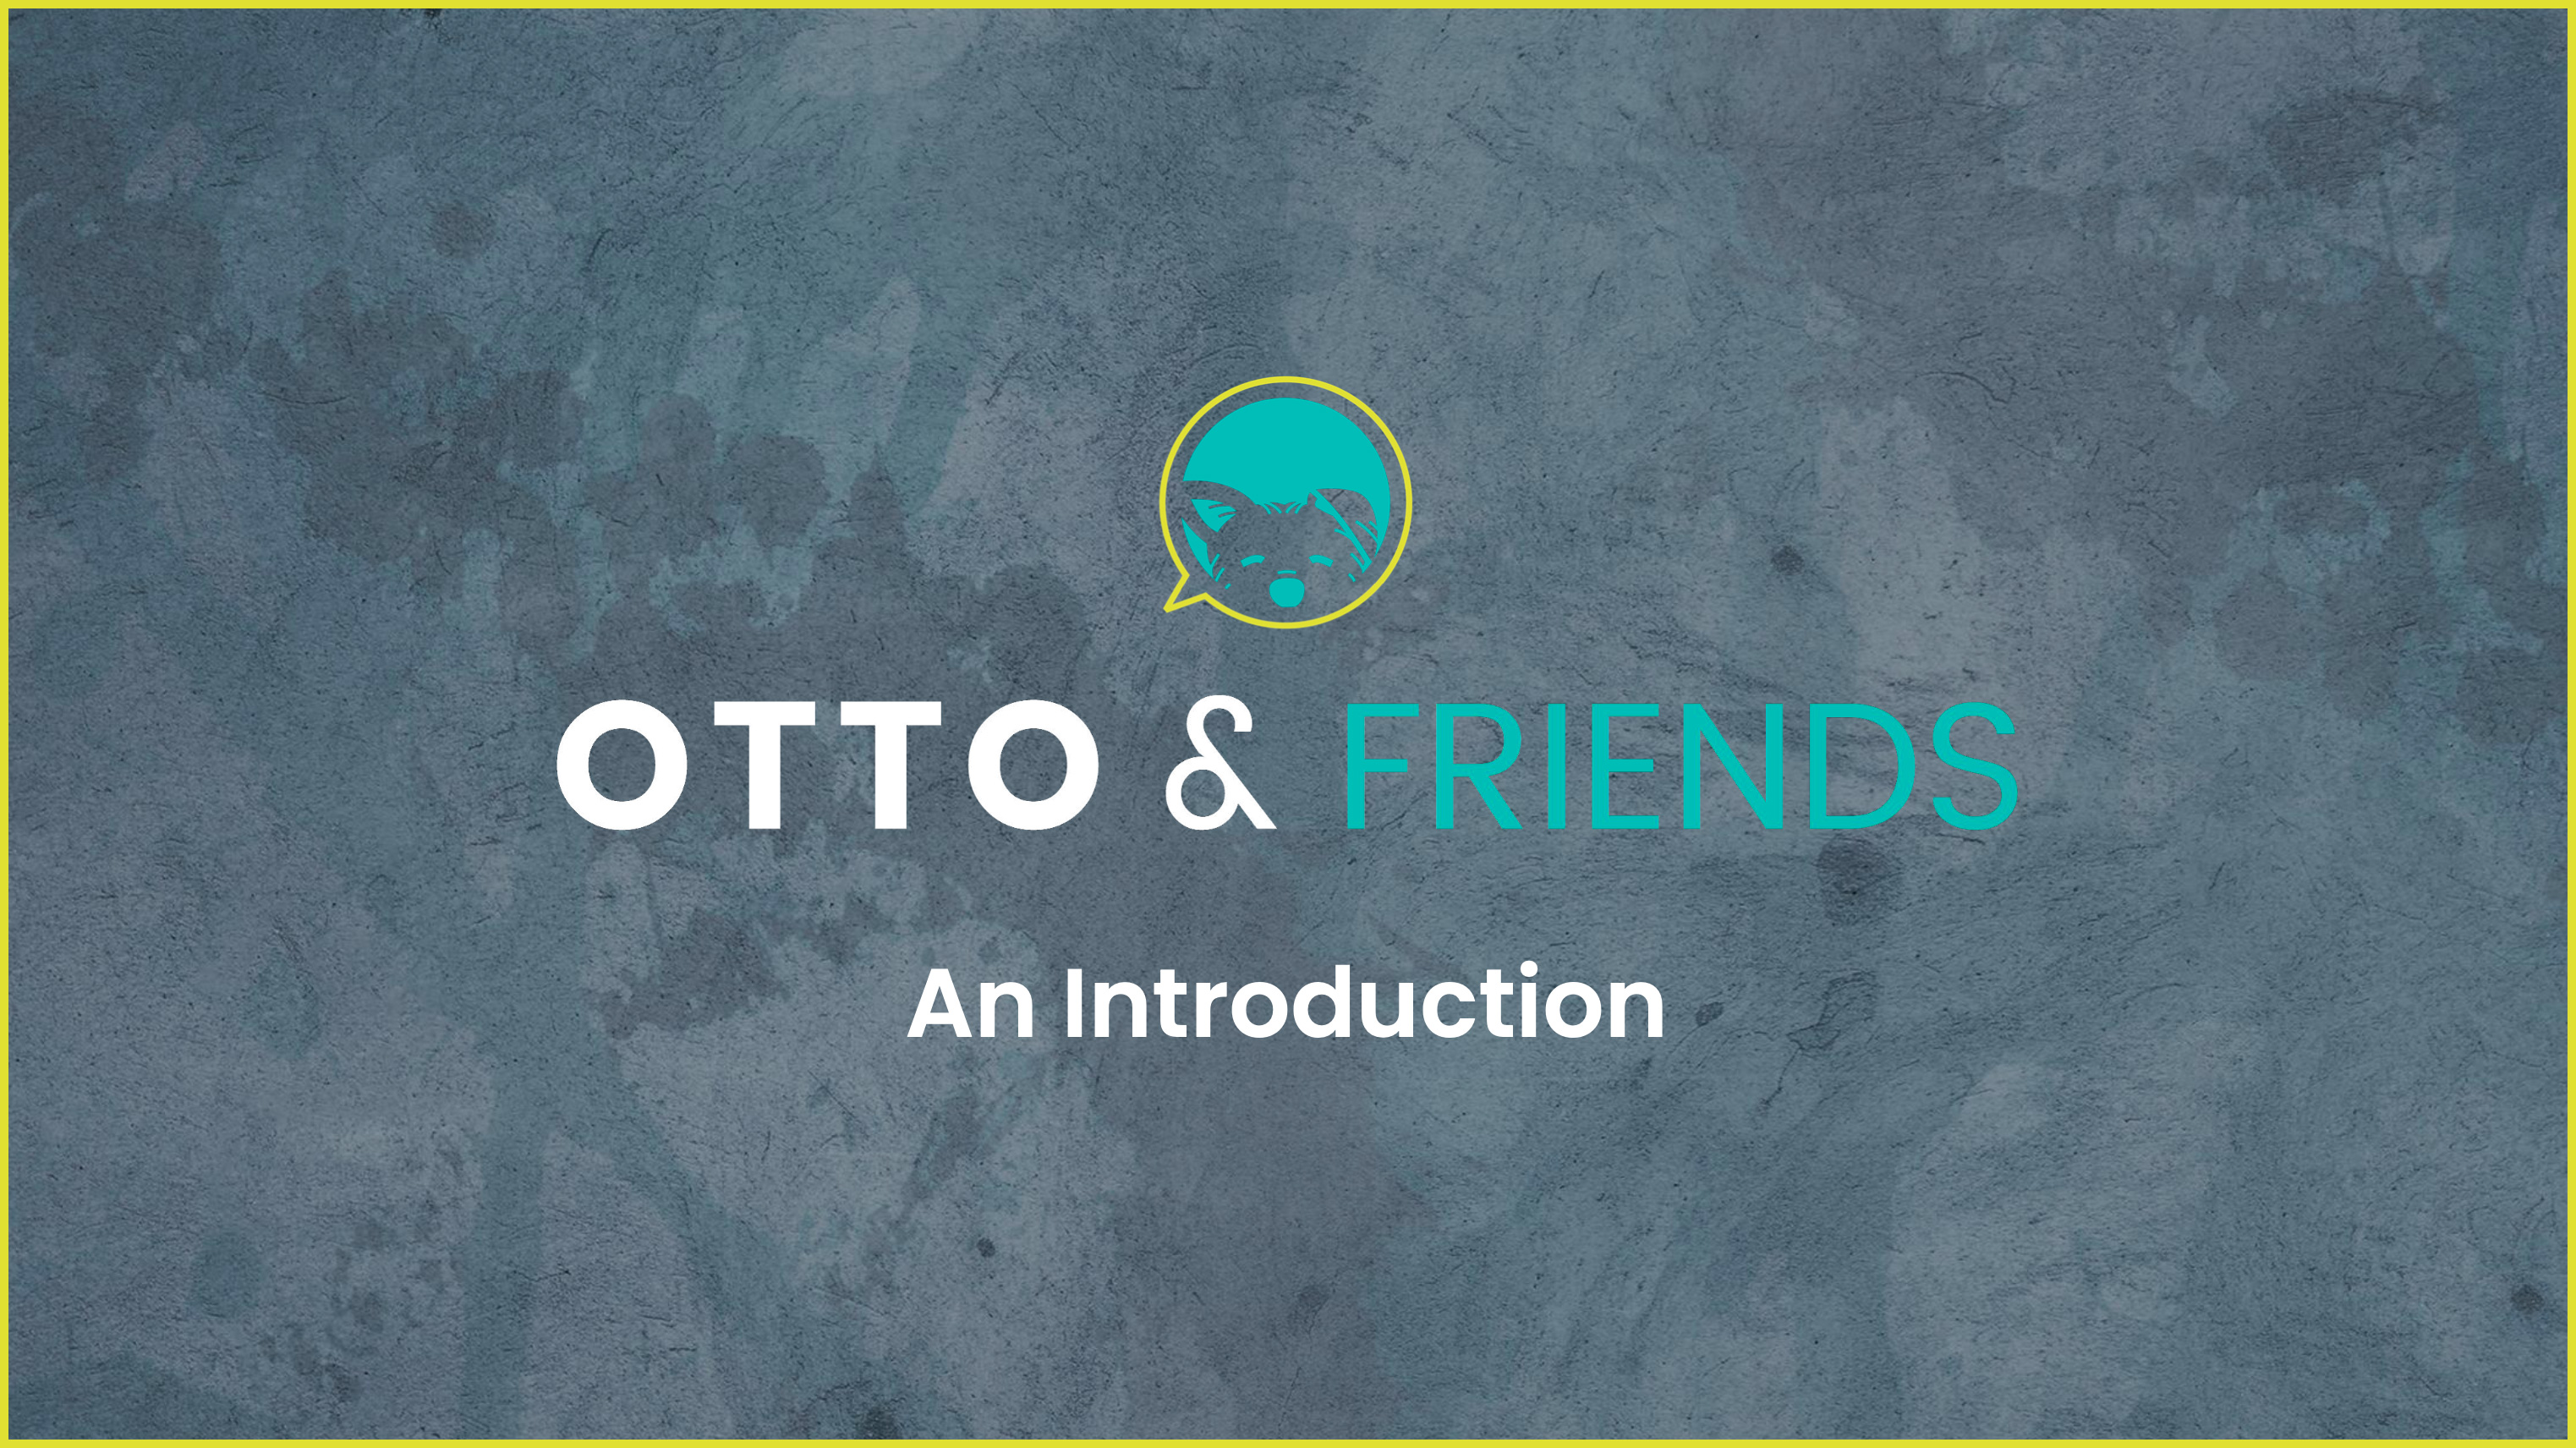 Otto & Friends: An Introduction